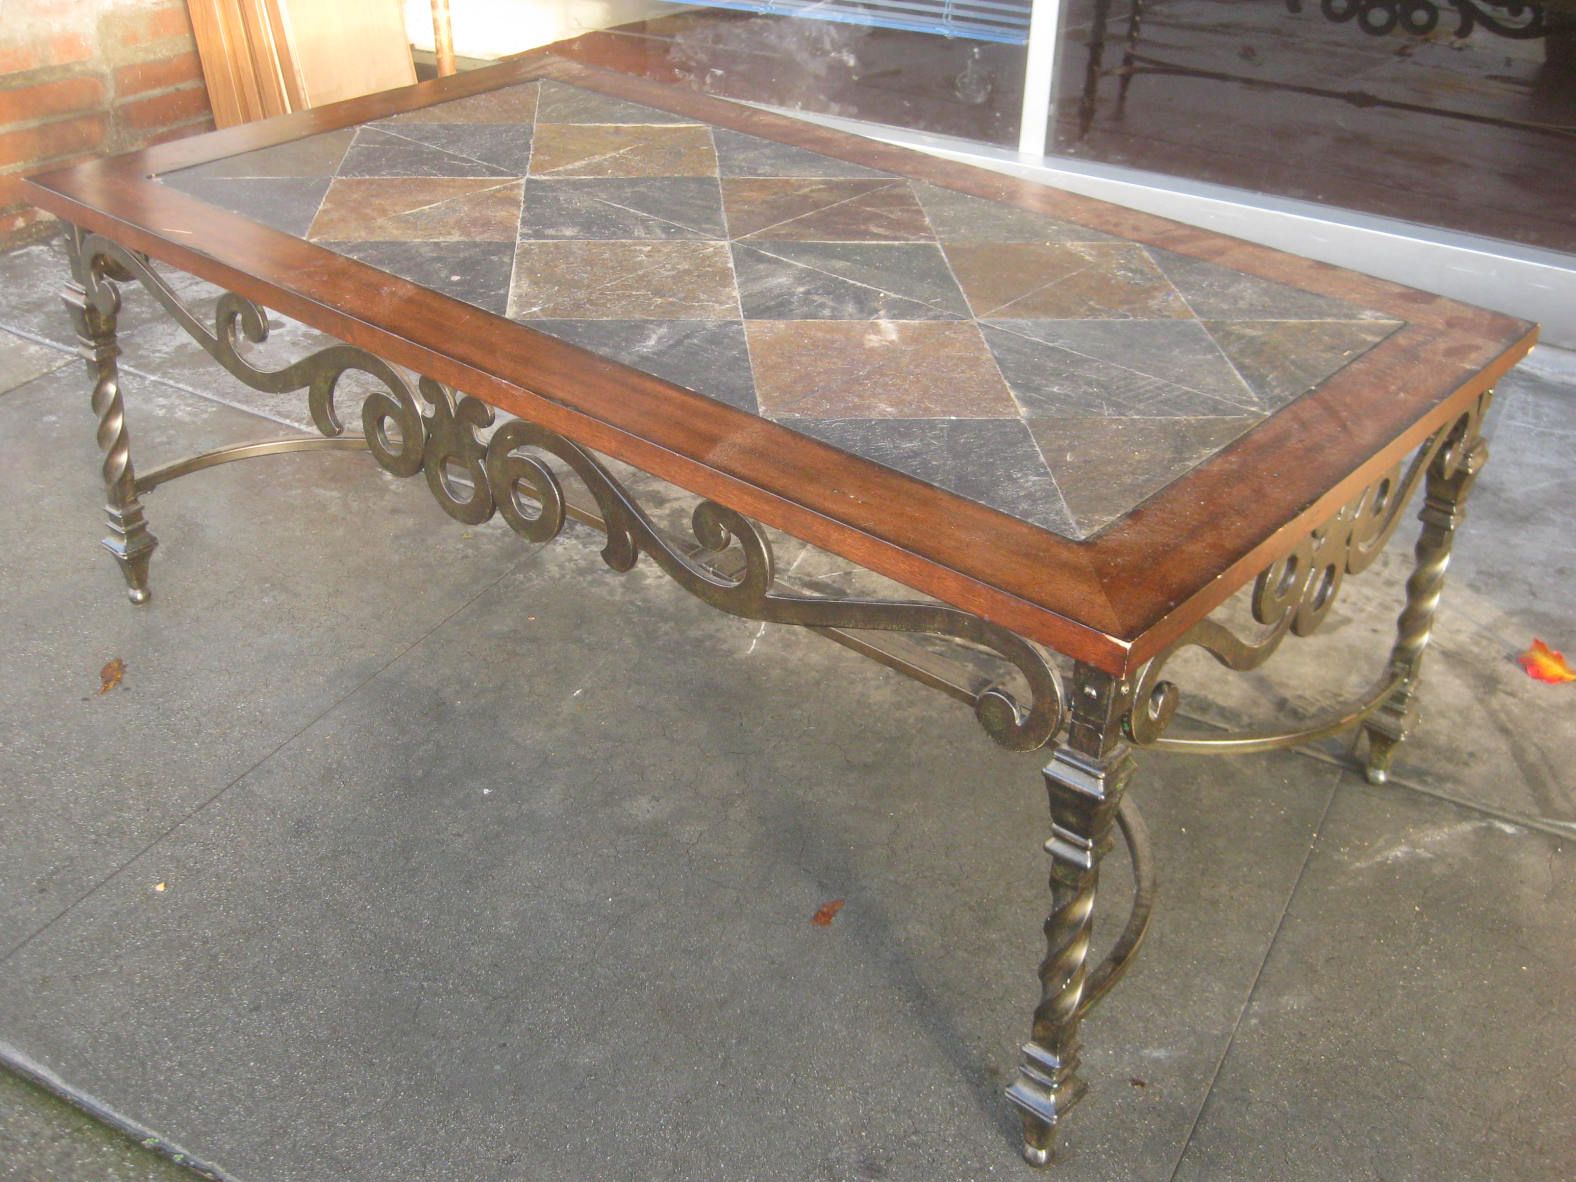 Uhuru Furniture & Collectibles: Sold – Tile Top Coffee Within Aged Black Iron Coffee Tables (View 2 of 15)